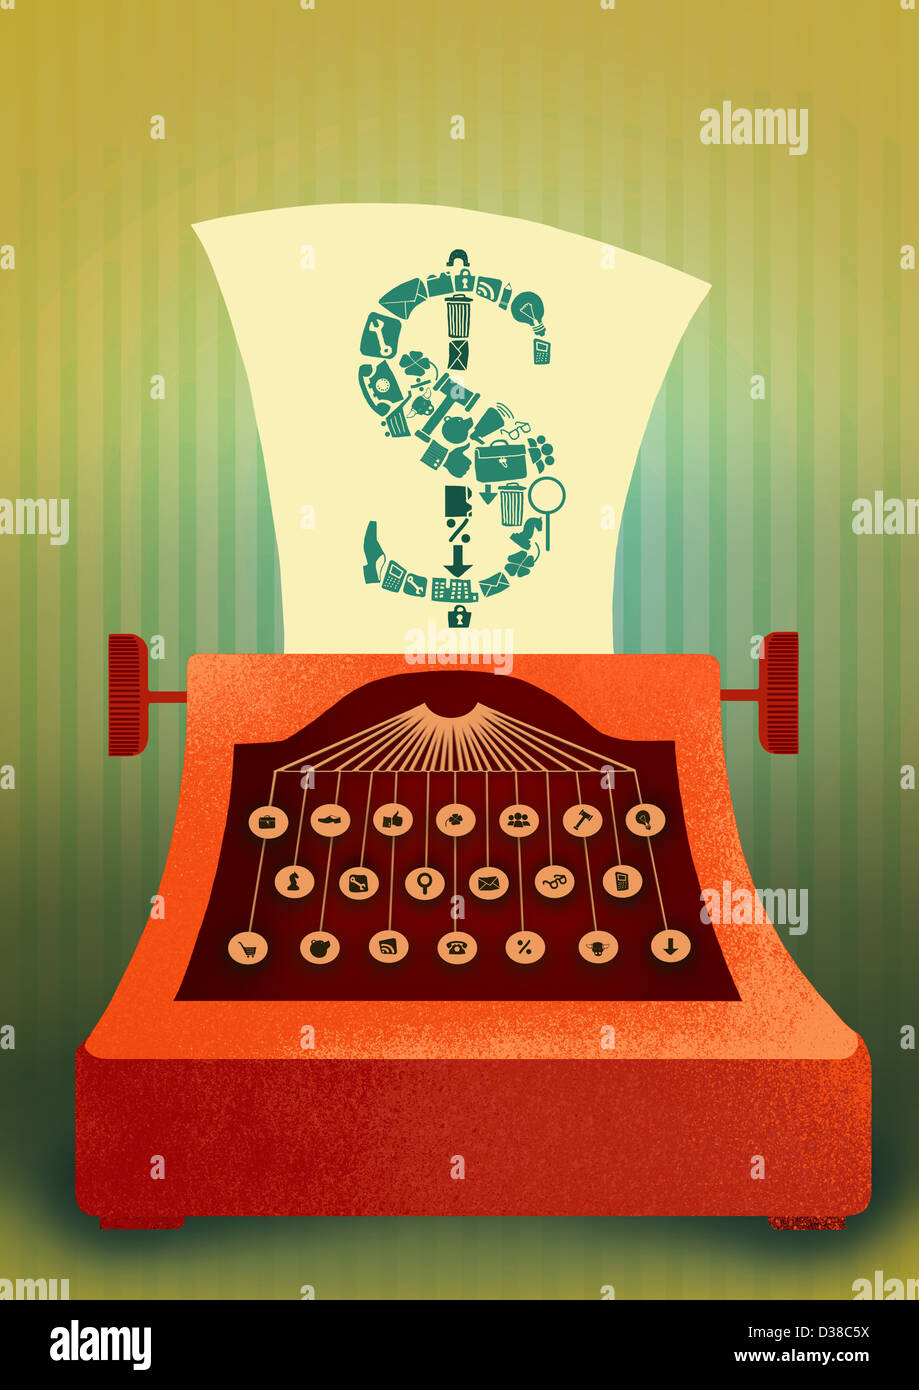 Illustrative image of typewriter with business sign keys printing out dollar sign on a paper Stock Photo